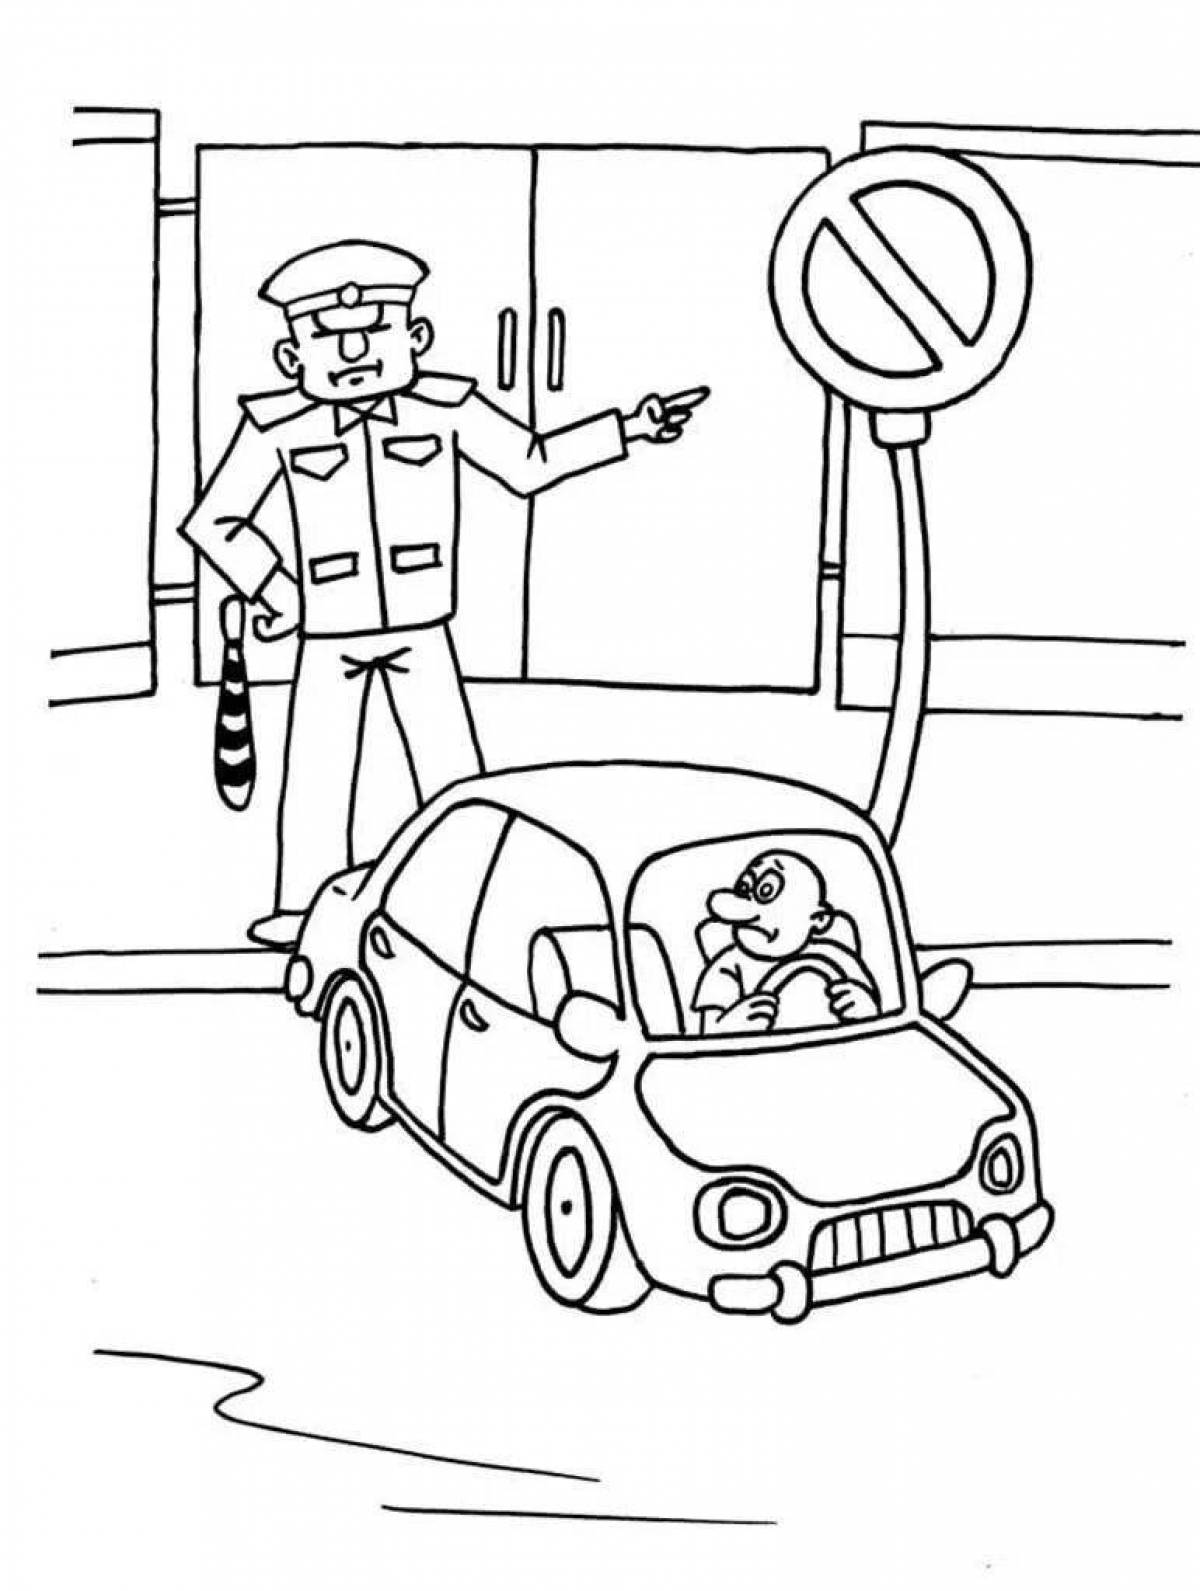 Playful traffic safety coloring page